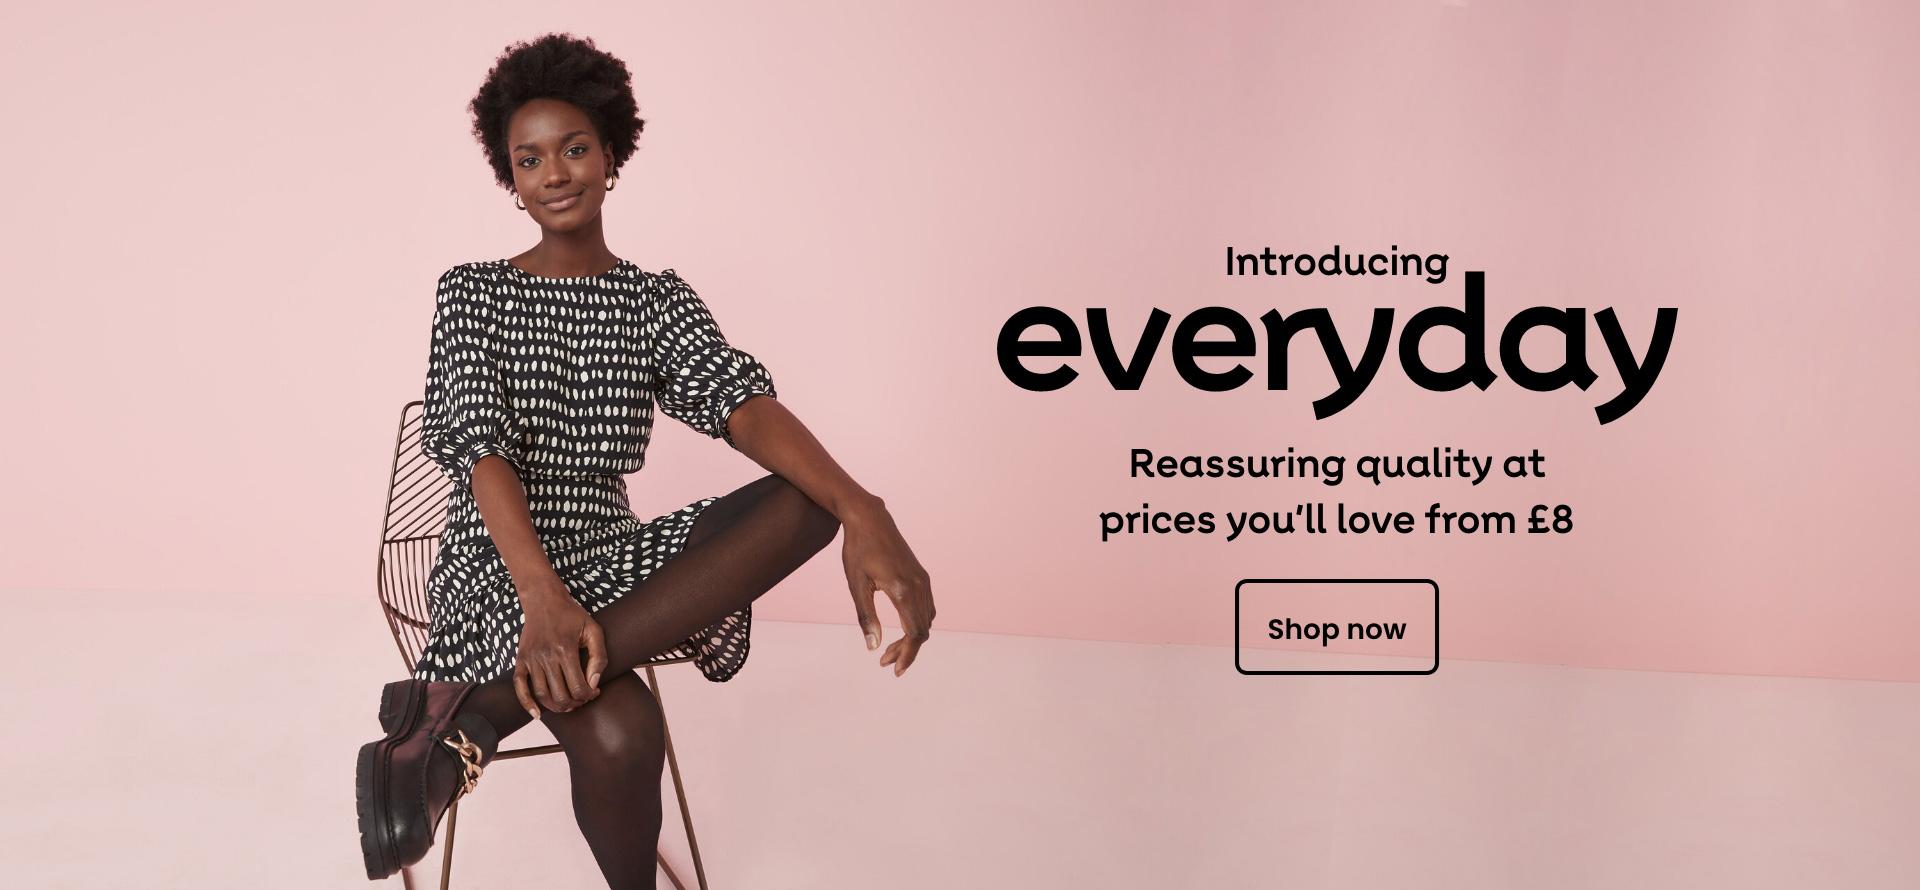 Introducing Everyday Reassuring quality at prices you’ll love from £8